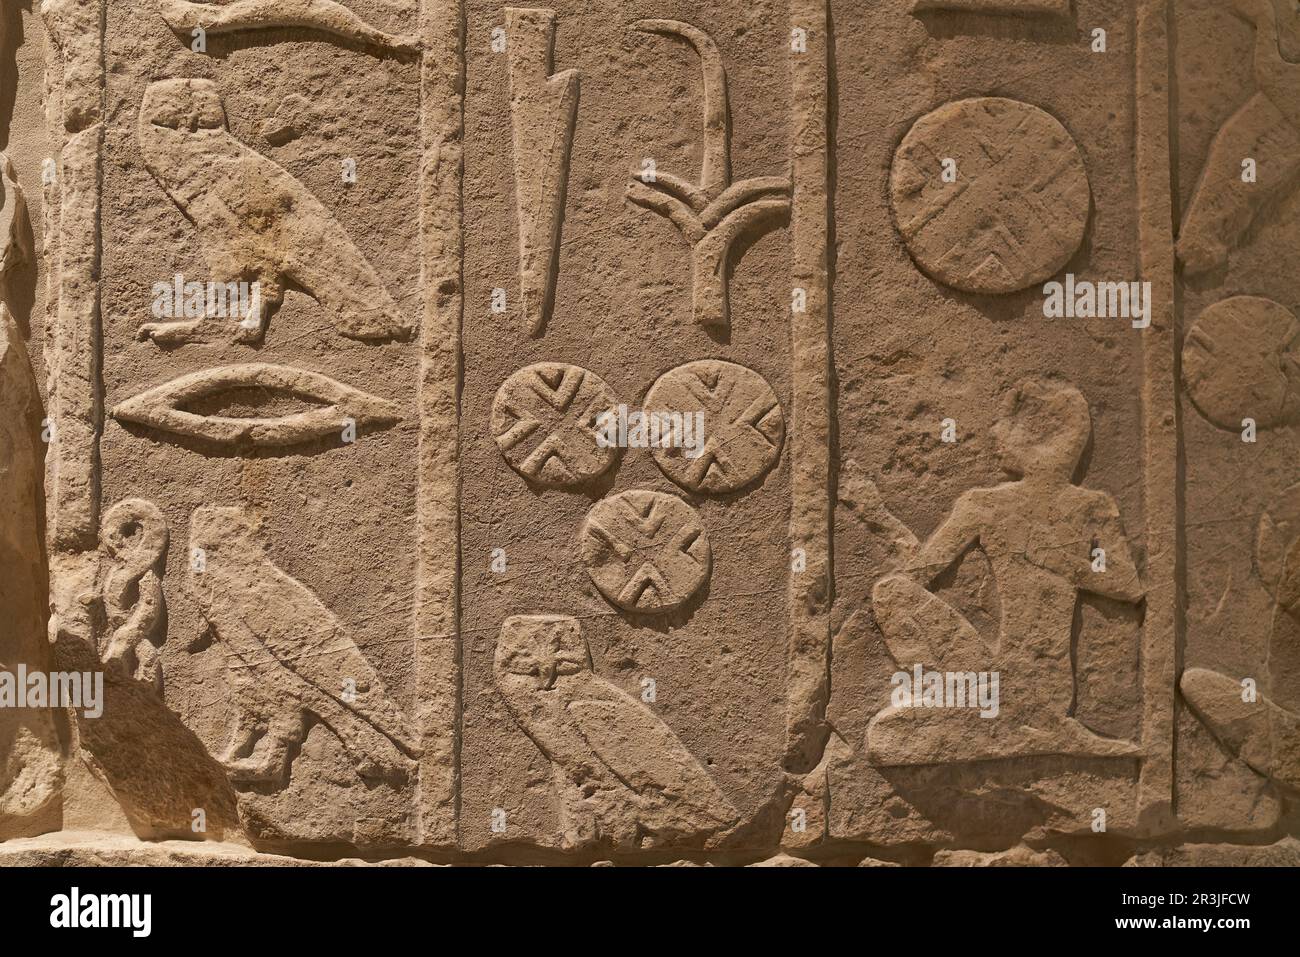 Ancient text in the form of Egyptian hieroglyphics on a wall of limestone Stock Photo